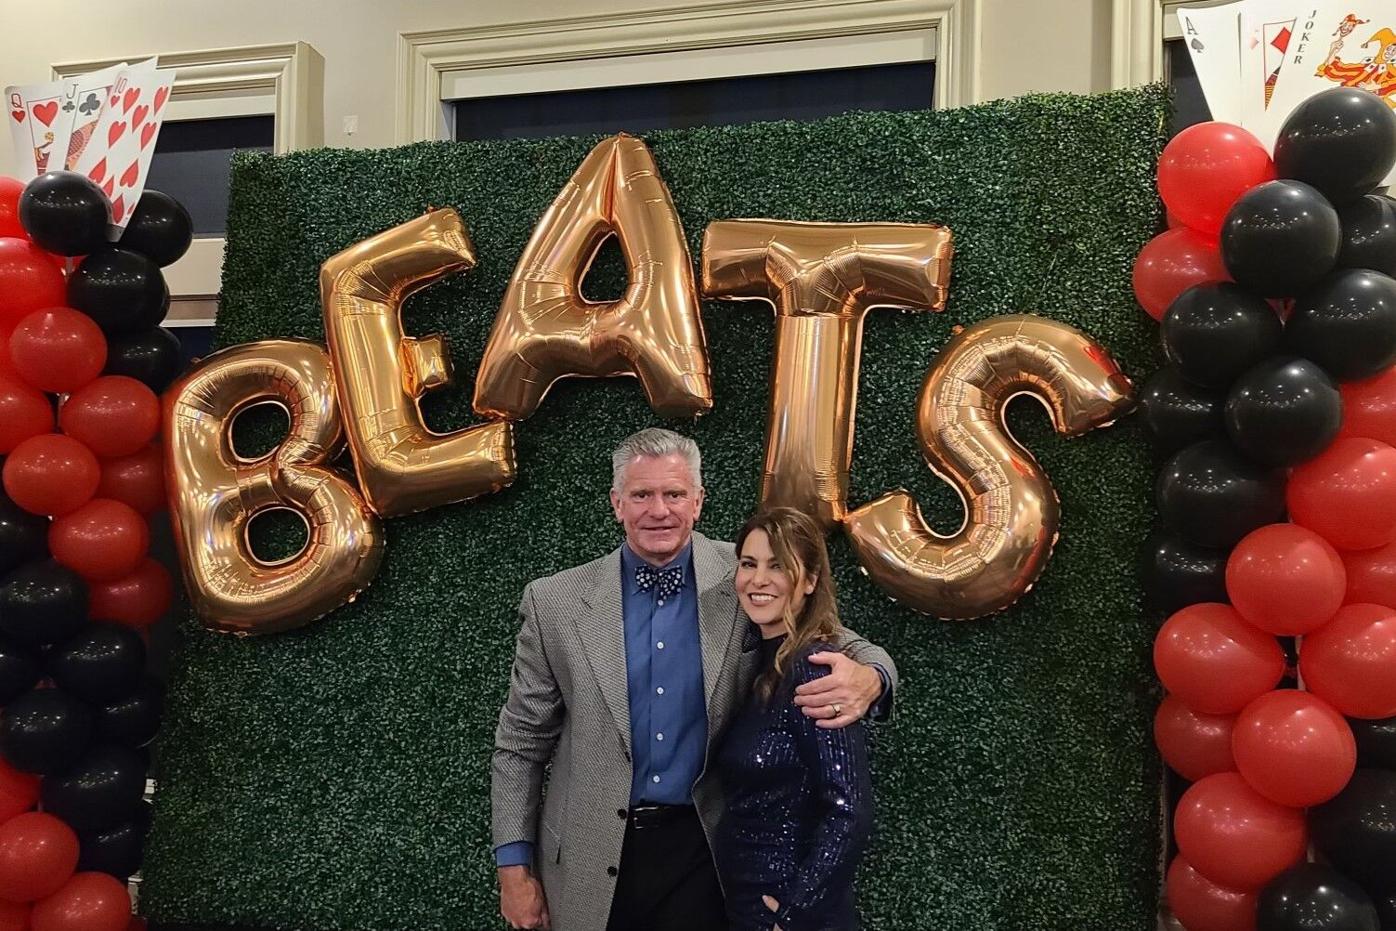 BEATS is Having a Fun Casino Night and Derby Party